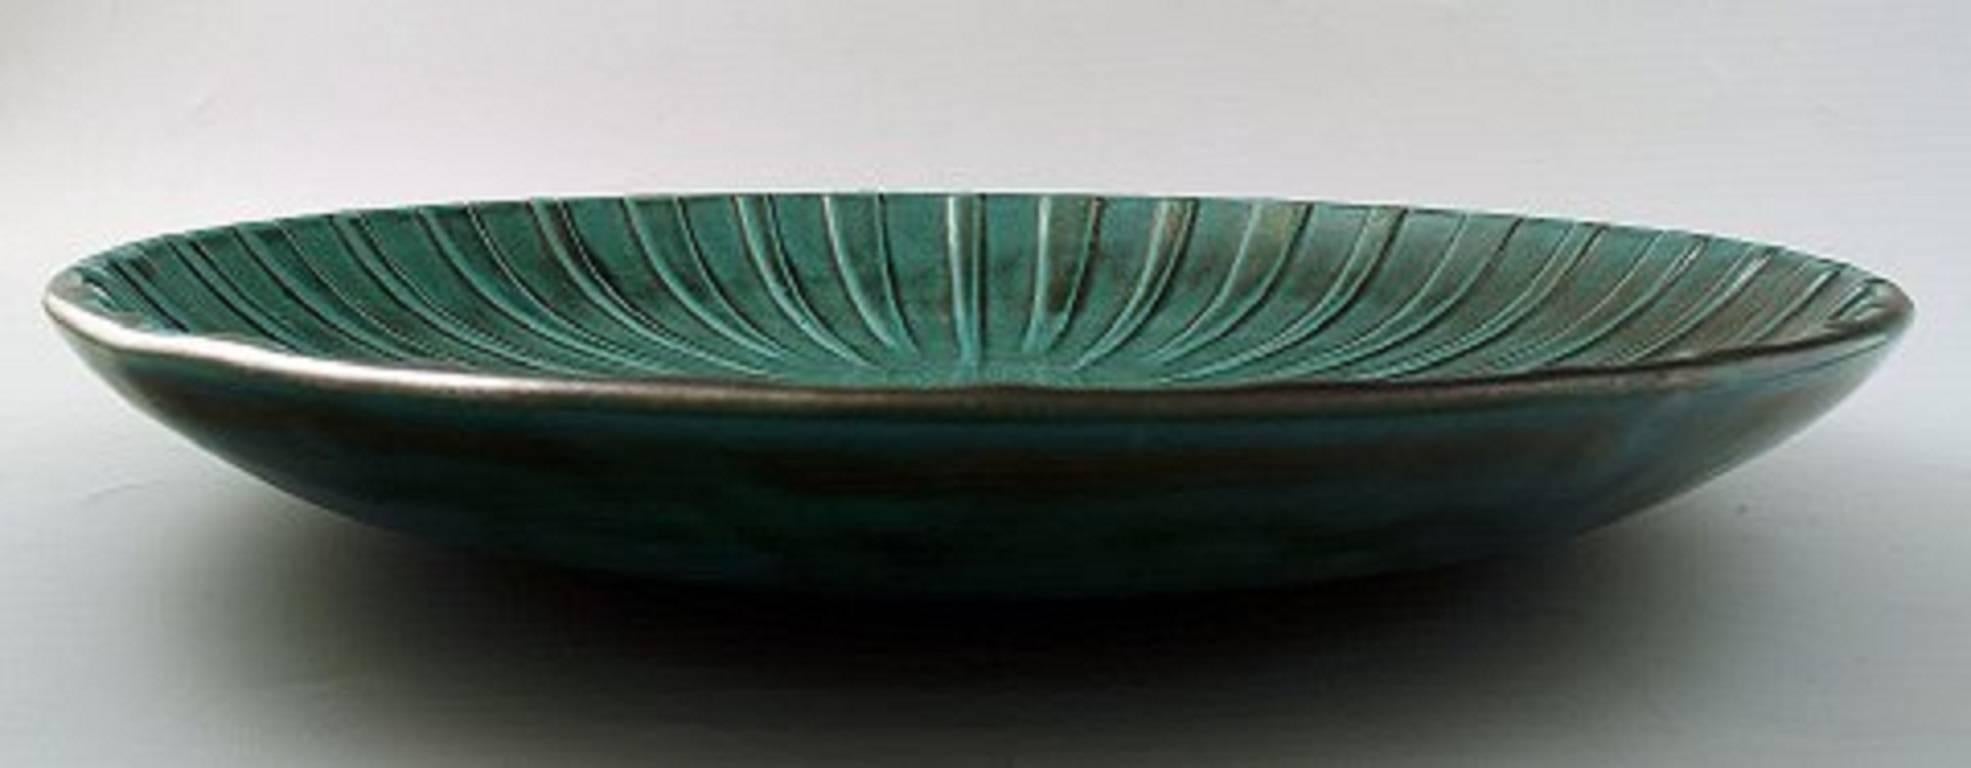 Upsala-Ekeby large ceramic dish in Art Deco style.
Sweden, 1940s-1950s.
In perfect condition.
Measures 37 cm. x 6 cm.
Stamped.